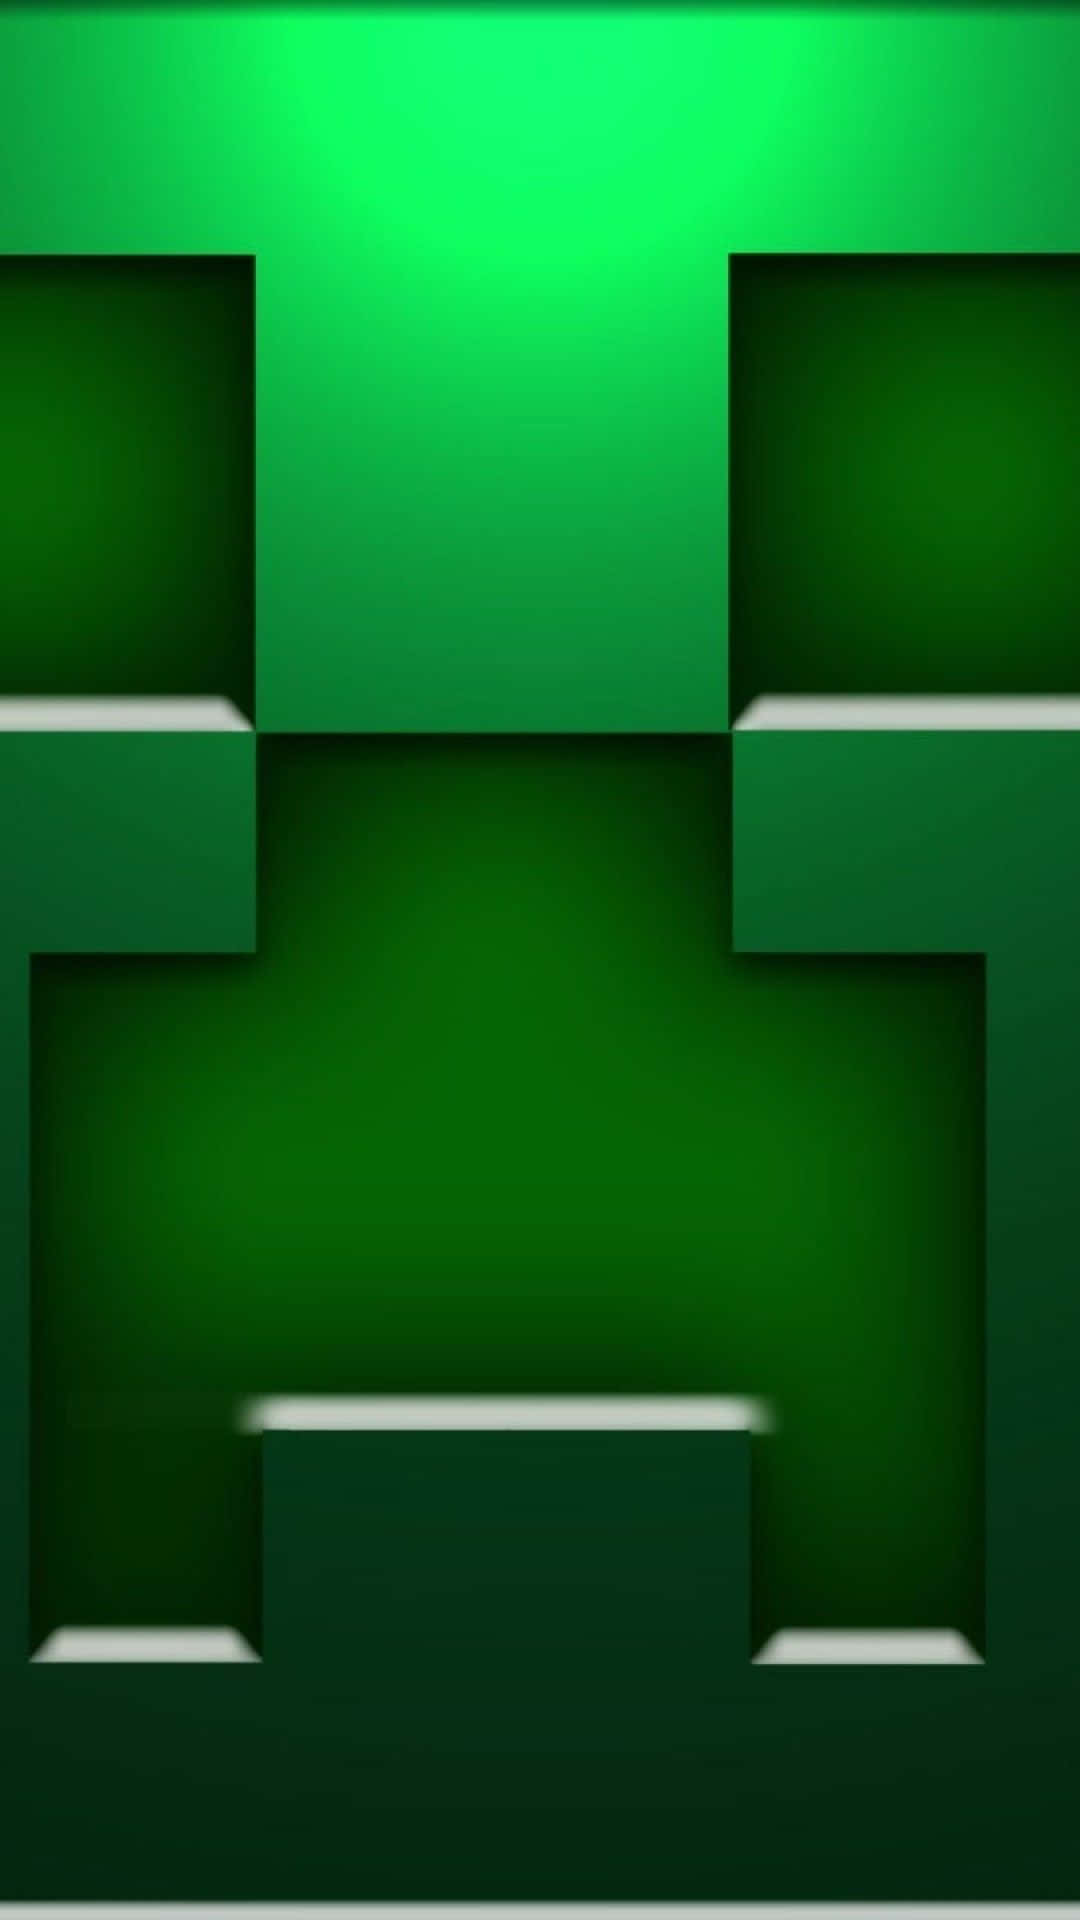 "Build Your World in Minecraft for Android" Wallpaper